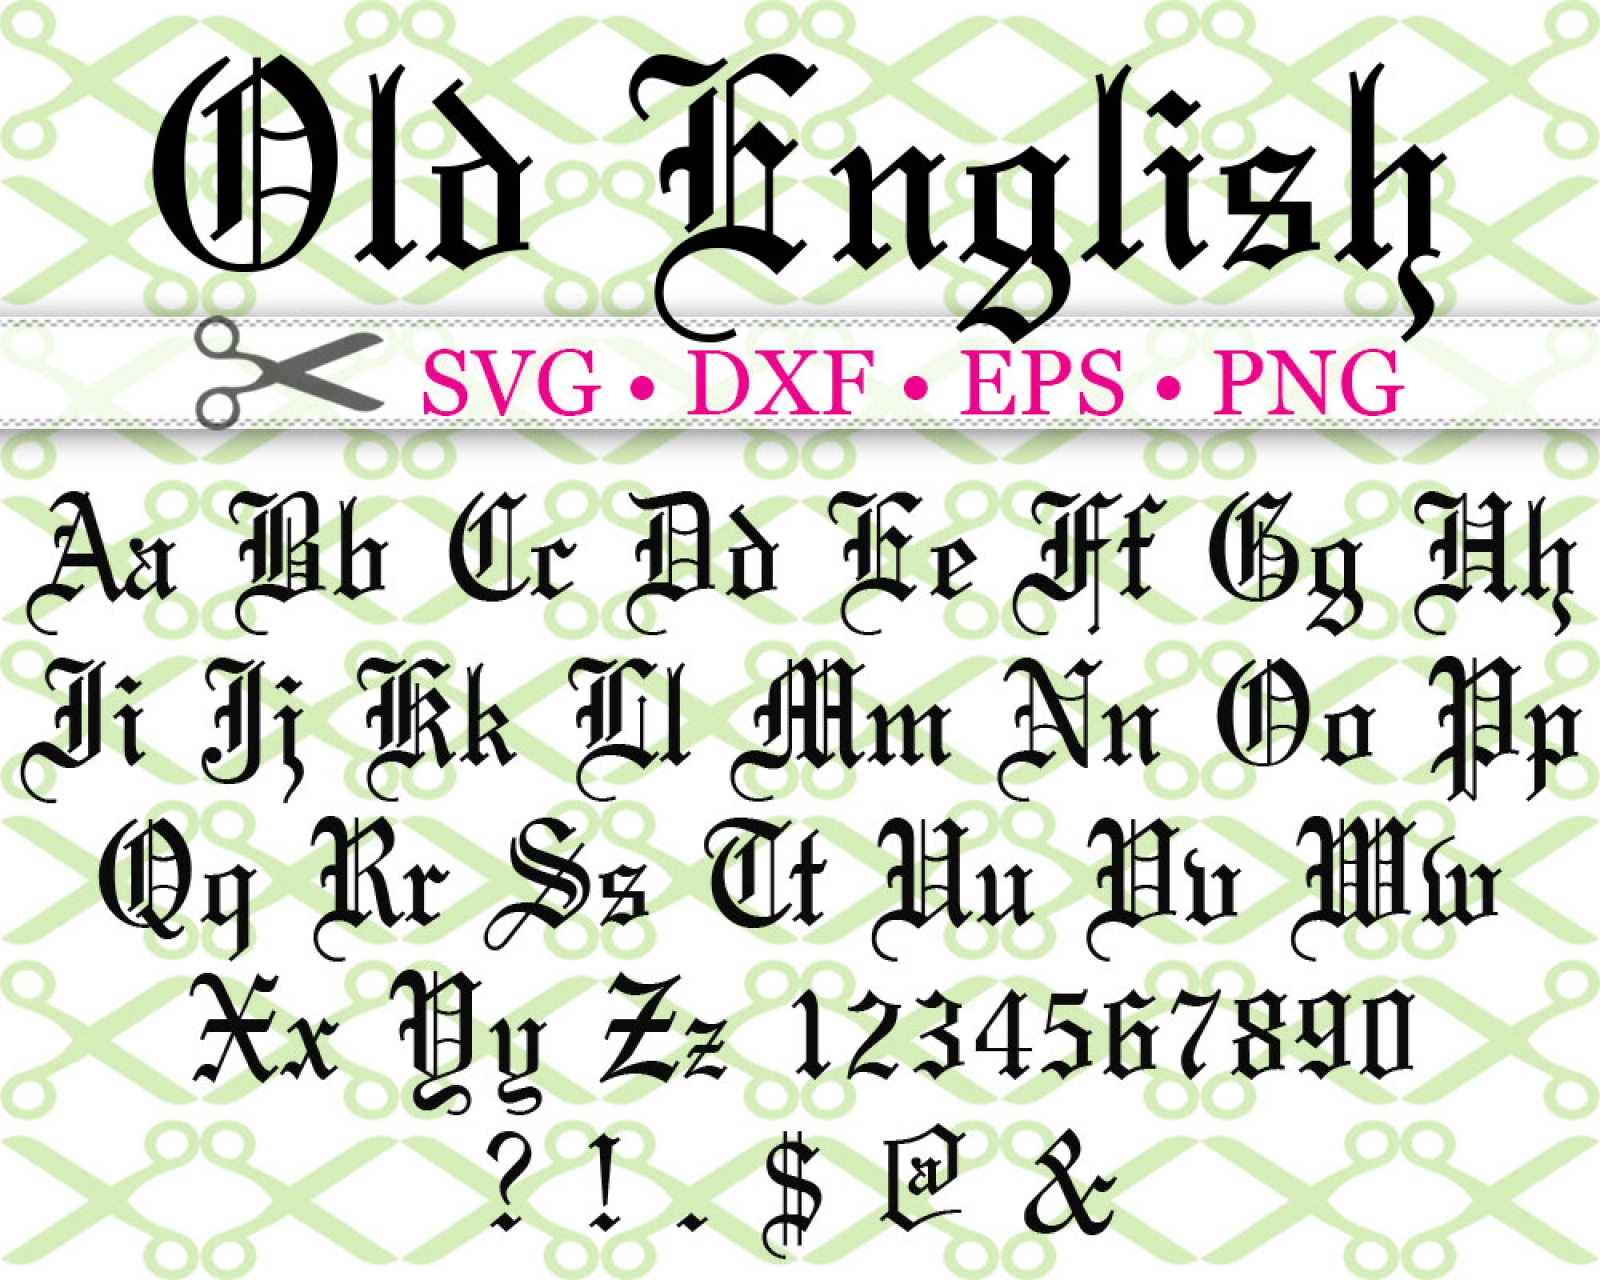 OLD ENGLISH SVG FONT Cricut Silhouette Files SVG DXF EPS PNG MONOGRAMSVG COM By SVG Designs